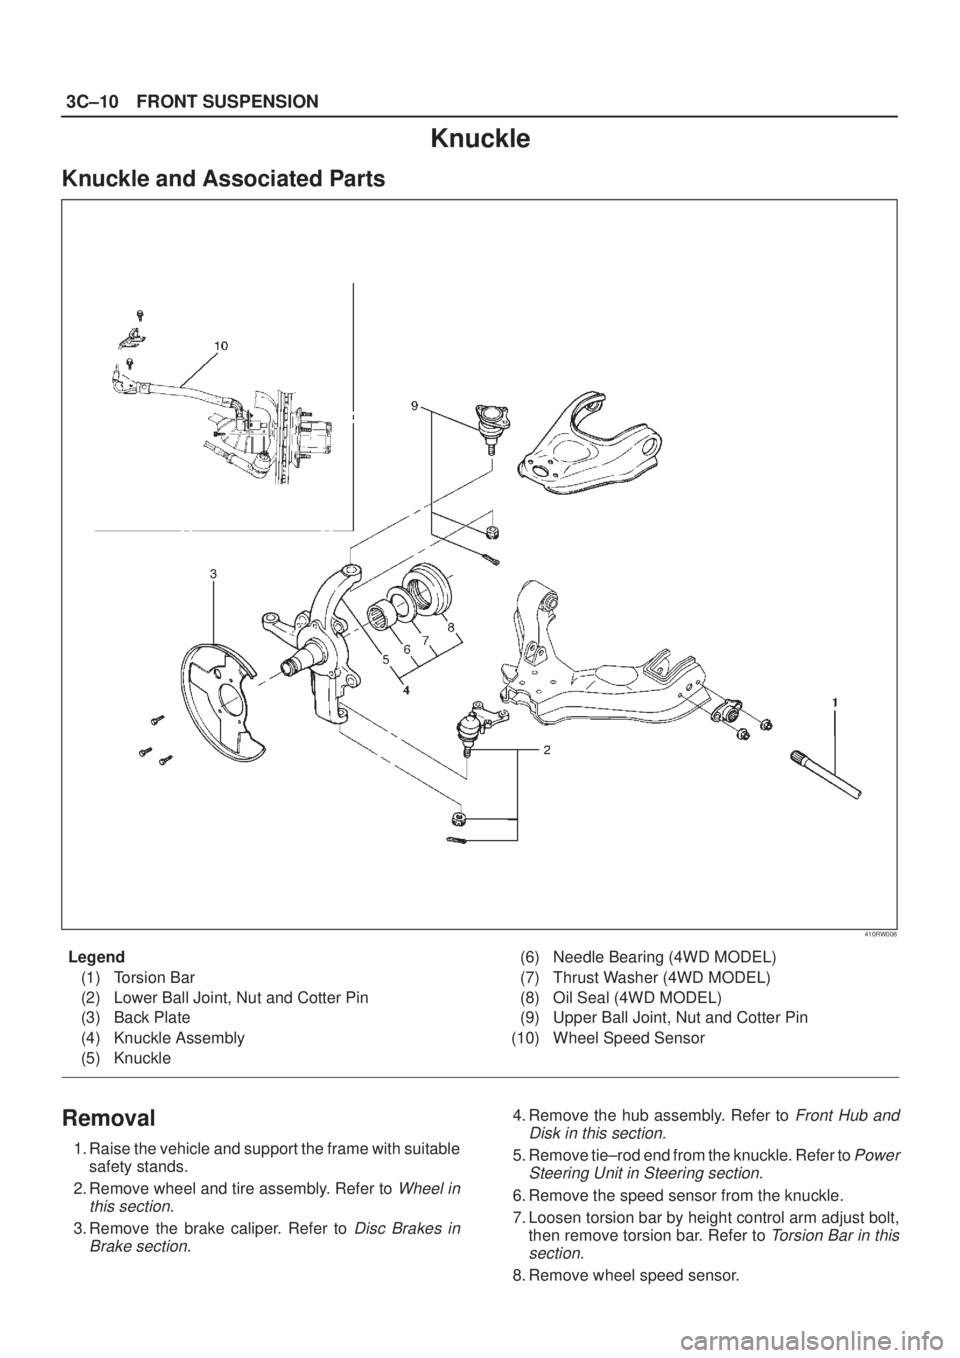 ISUZU AXIOM 2002  Service Repair Manual 3C±10FRONT SUSPENSION
Knuckle
Knuckle and Associated Parts
410RW006
Legend
(1) Torsion Bar
(2) Lower Ball Joint, Nut and Cotter Pin
(3) Back Plate
(4) Knuckle Assembly
(5) Knuckle(6) Needle Bearing (